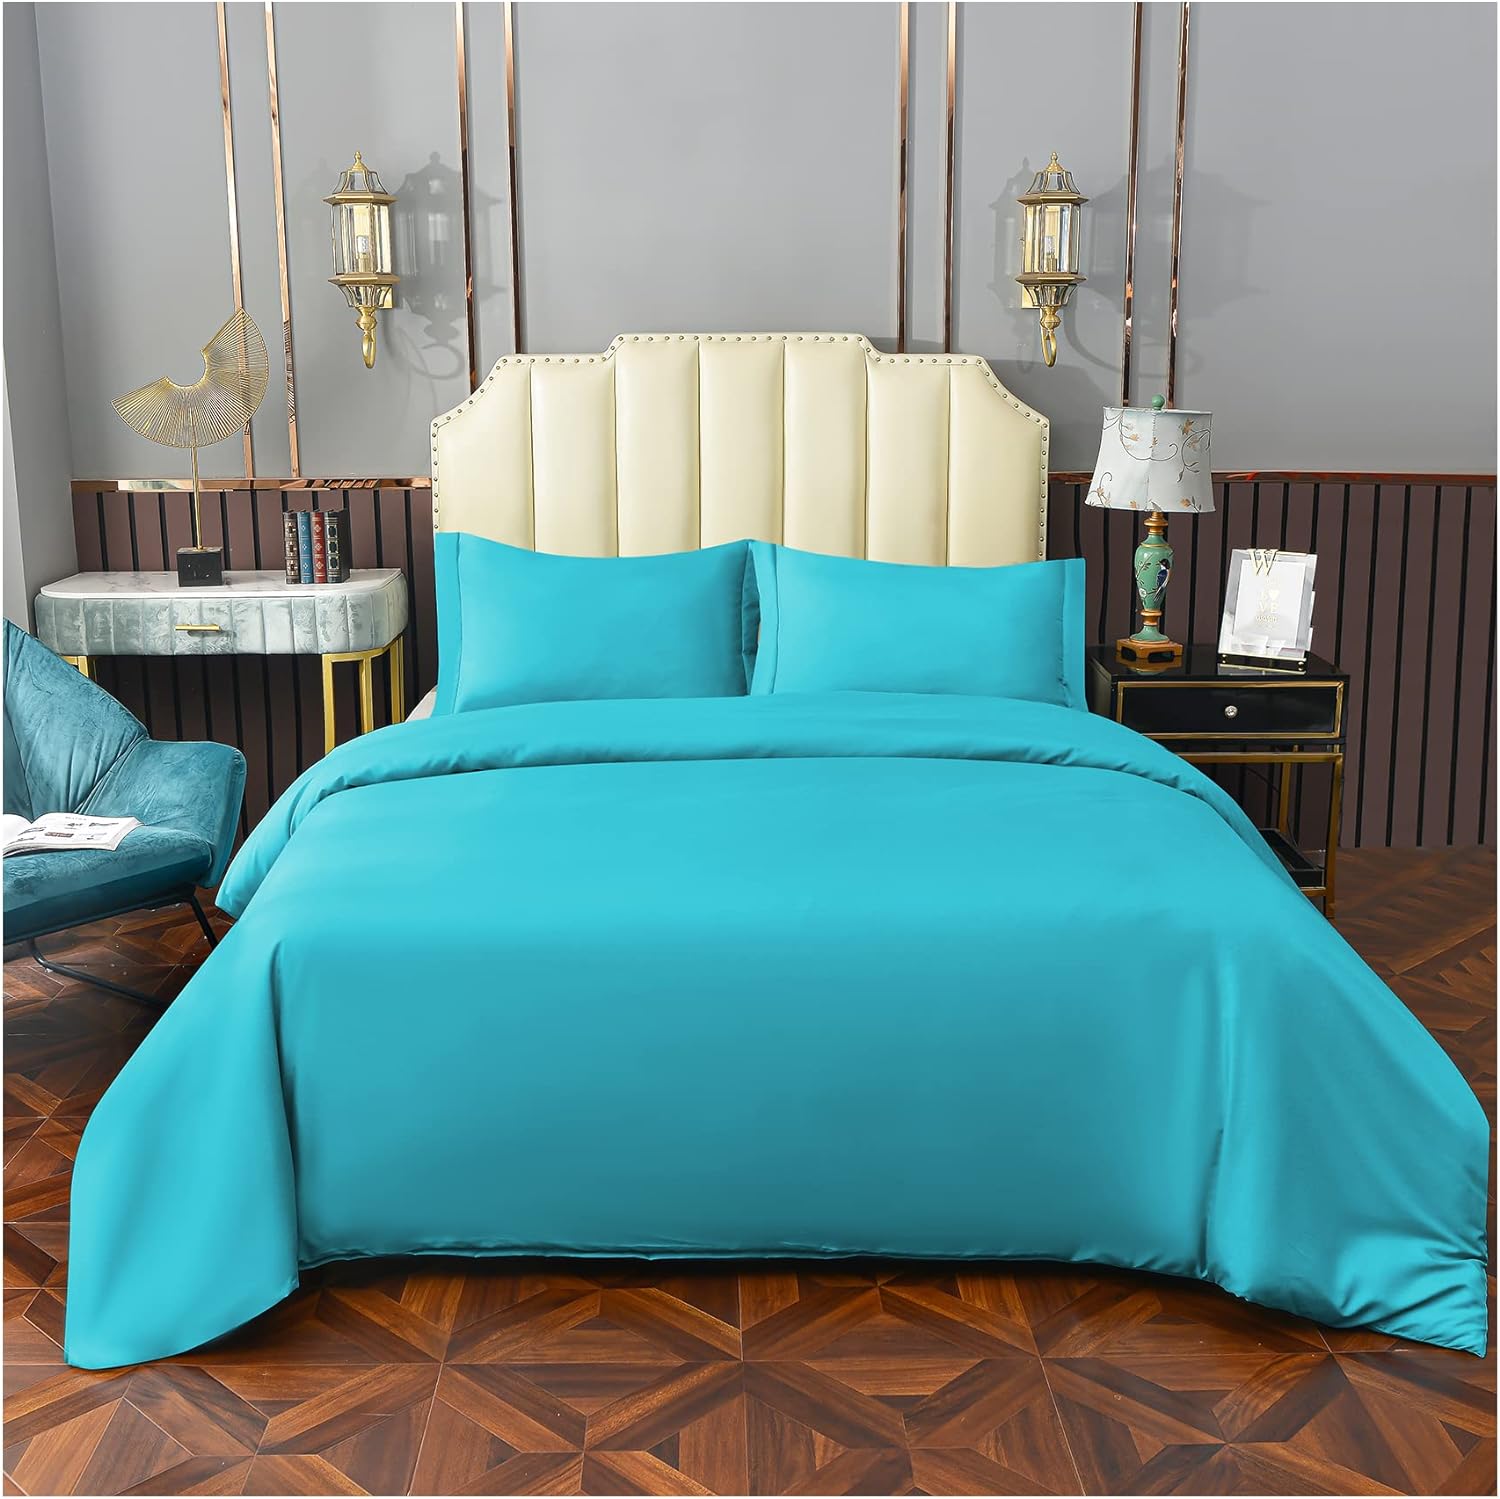 Whitney Home Textile Bamboo Microfiber Duvet Cover Set - Soft Cooling Duvet Cover King Size 3 Pieces Hotel Comforter Cover with Zipper Closure & Corner Ties 102 x 90